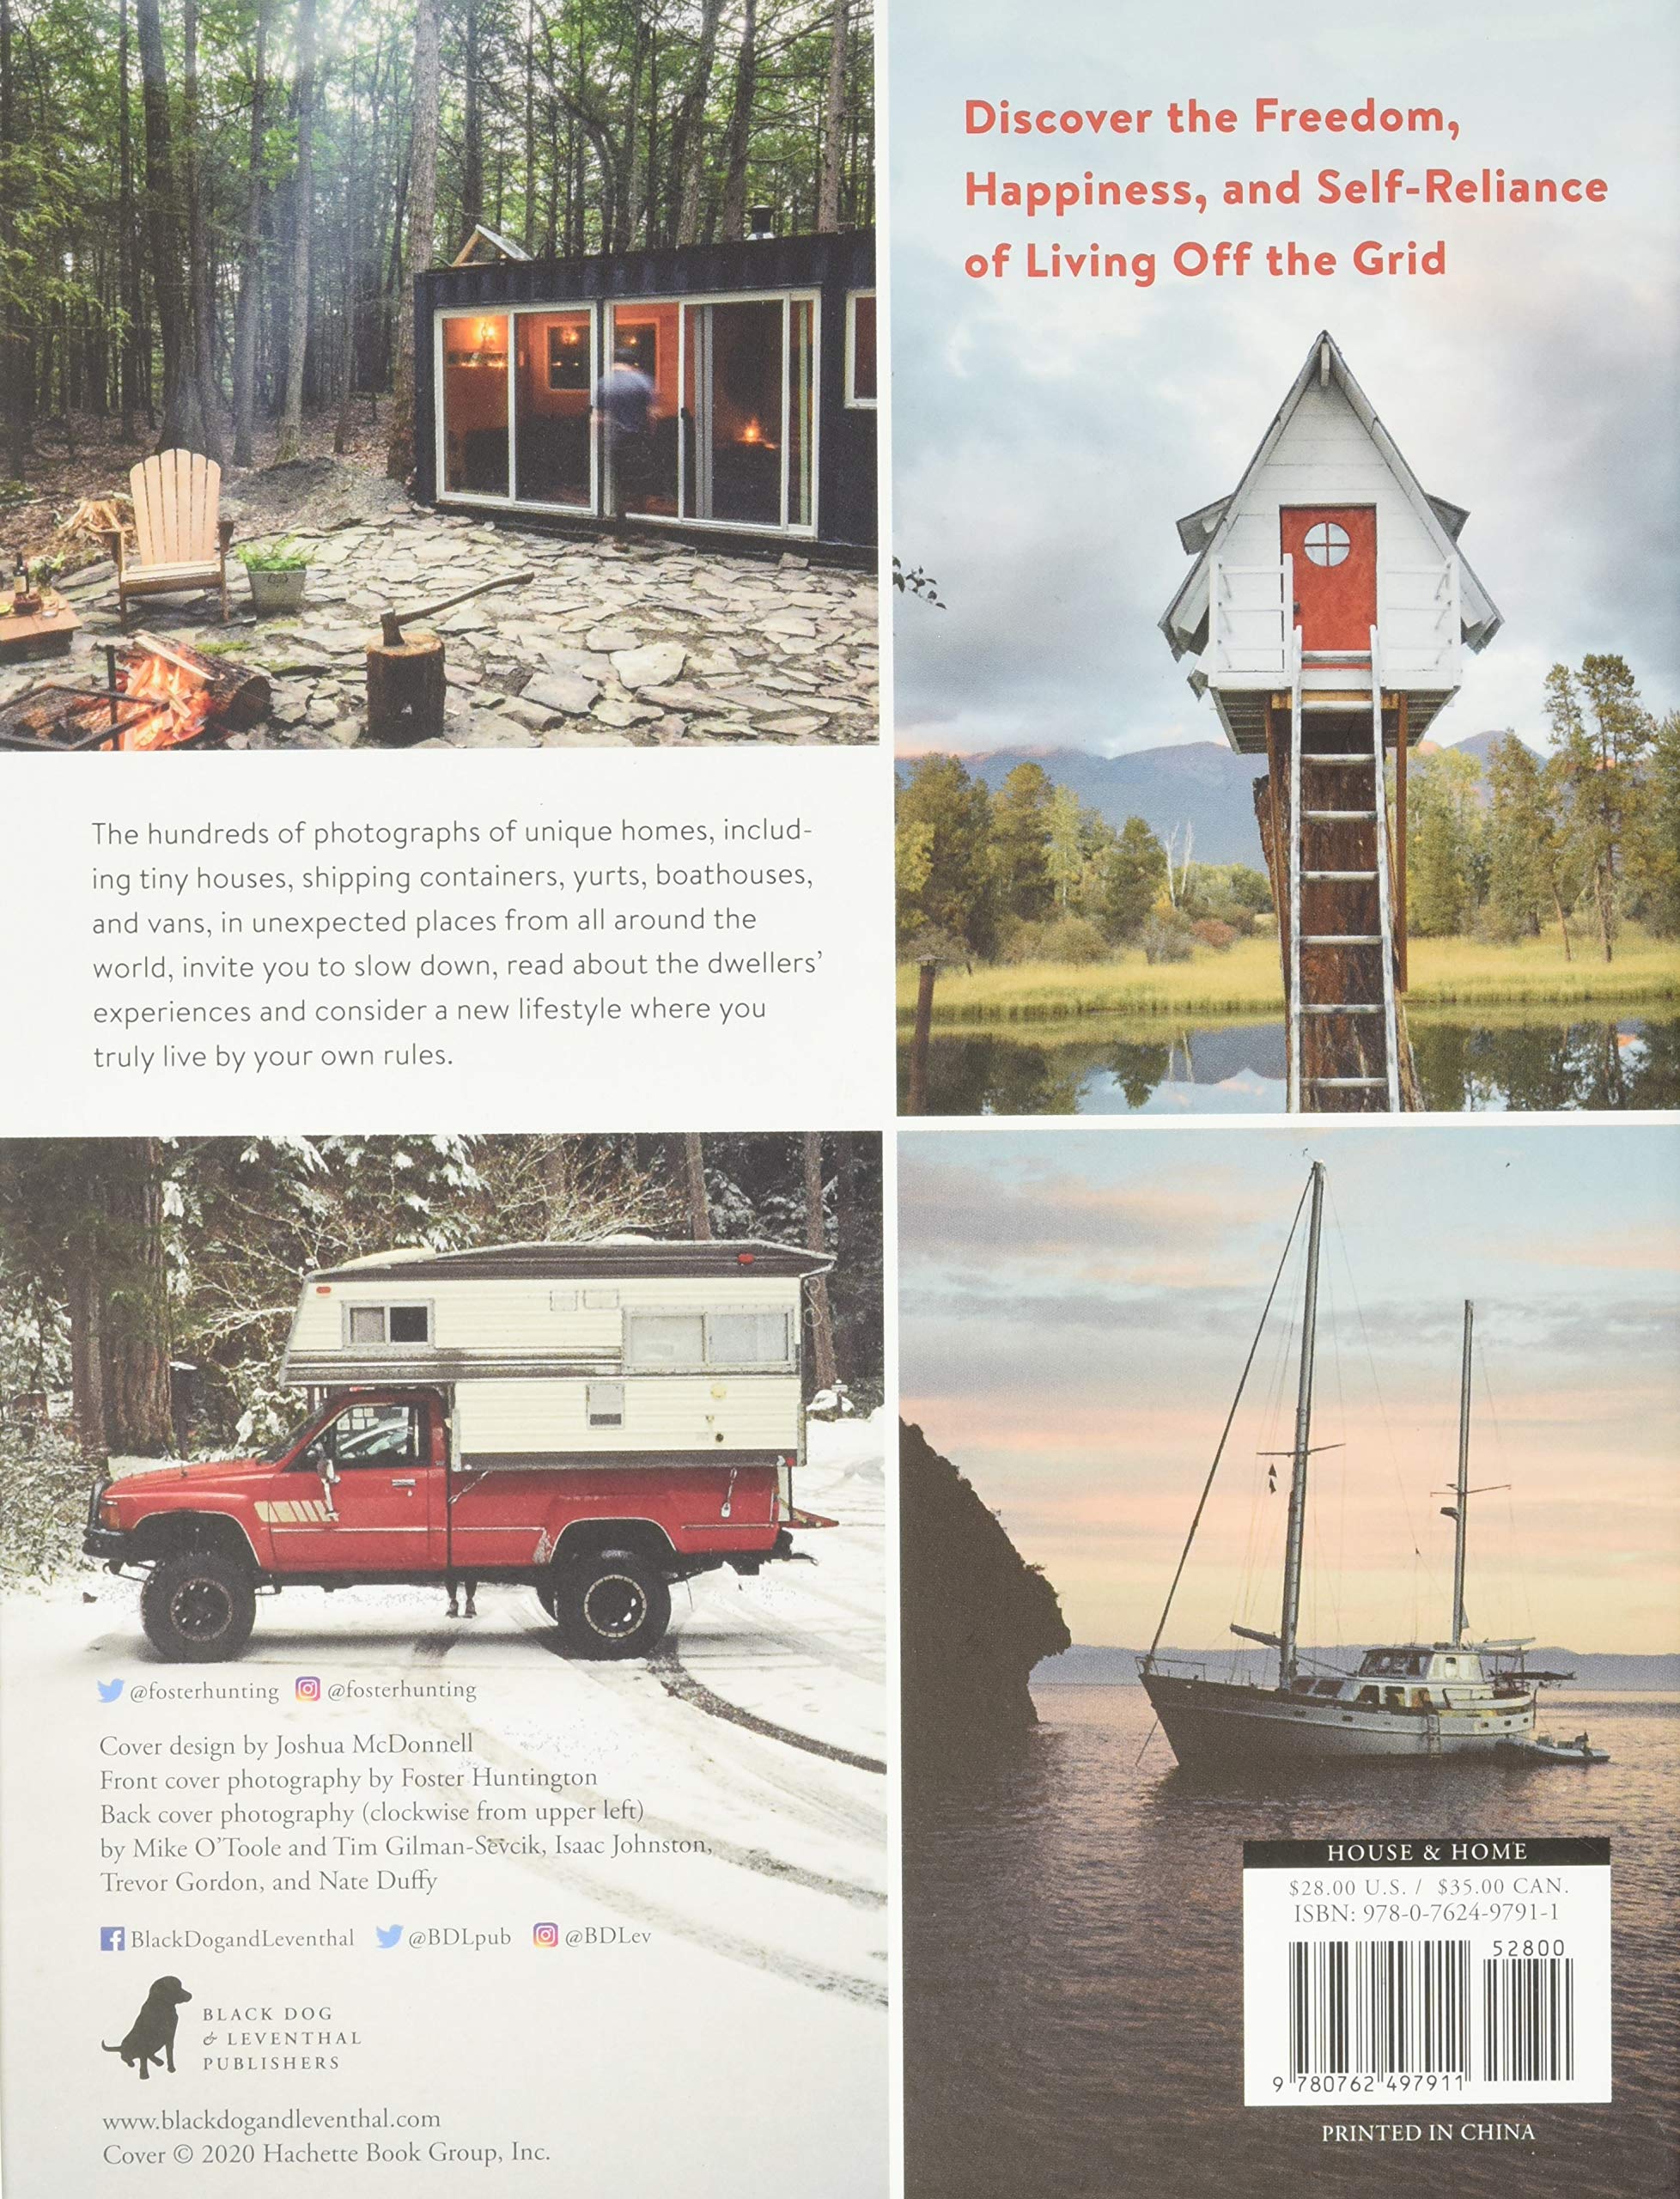 Off Grid Life: Your Ideal Home in the Middle of Nowhere Hardcover